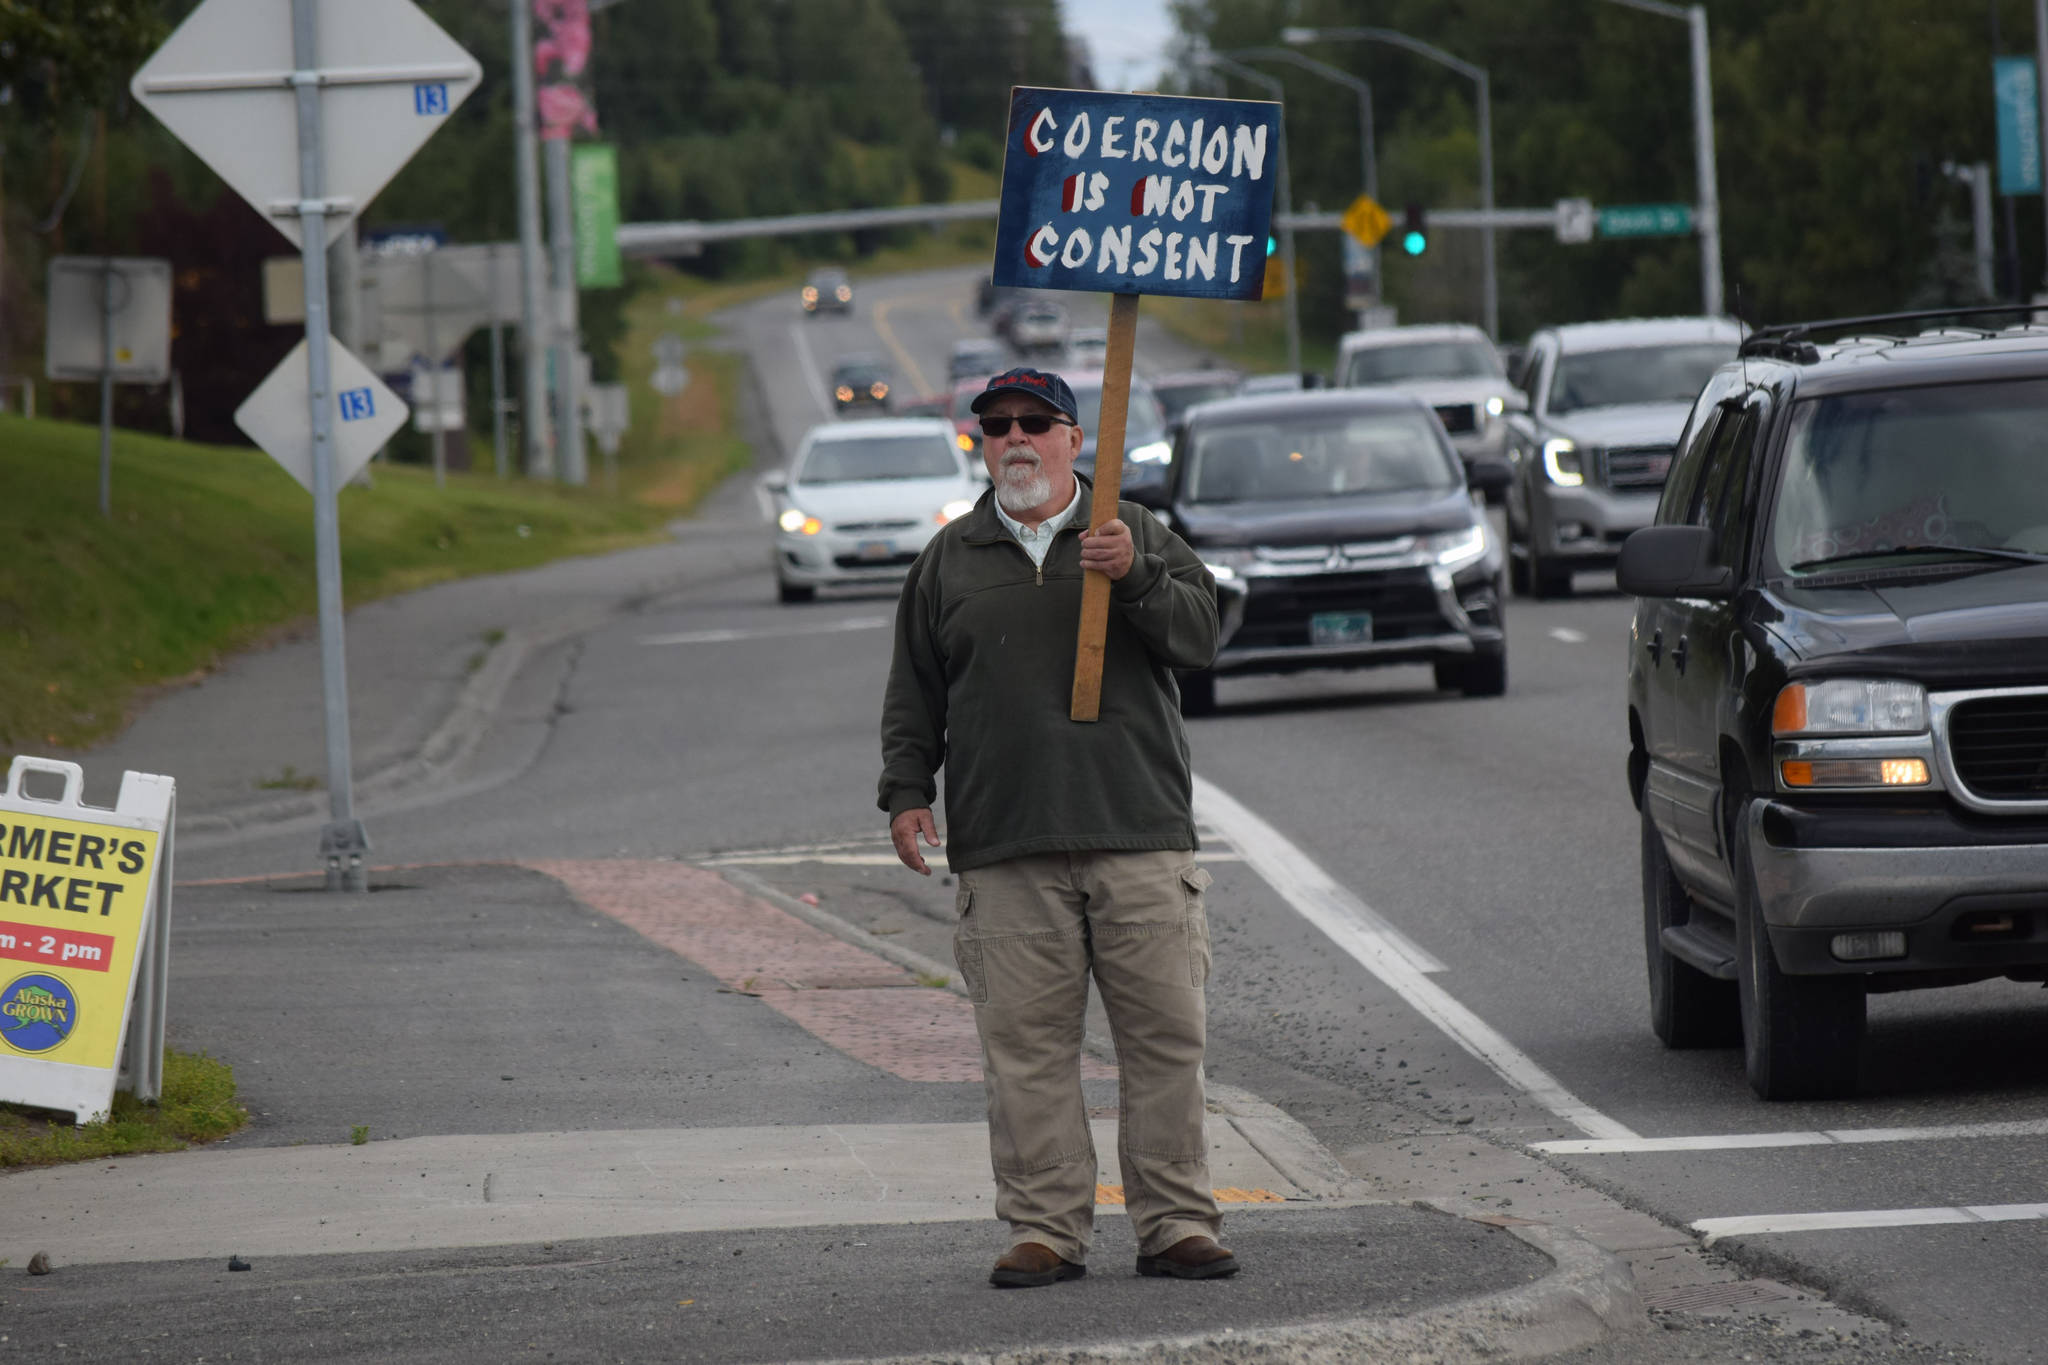 Kevin Hall stands at the “Y” intersection of the Kenai Spur and Sterling highways in Soldotna on Saturday, Aug. 14 to protest mandatory COVID-19 vaccines and mitigation protocols. (Camille Botello/Peninsula Clarion)